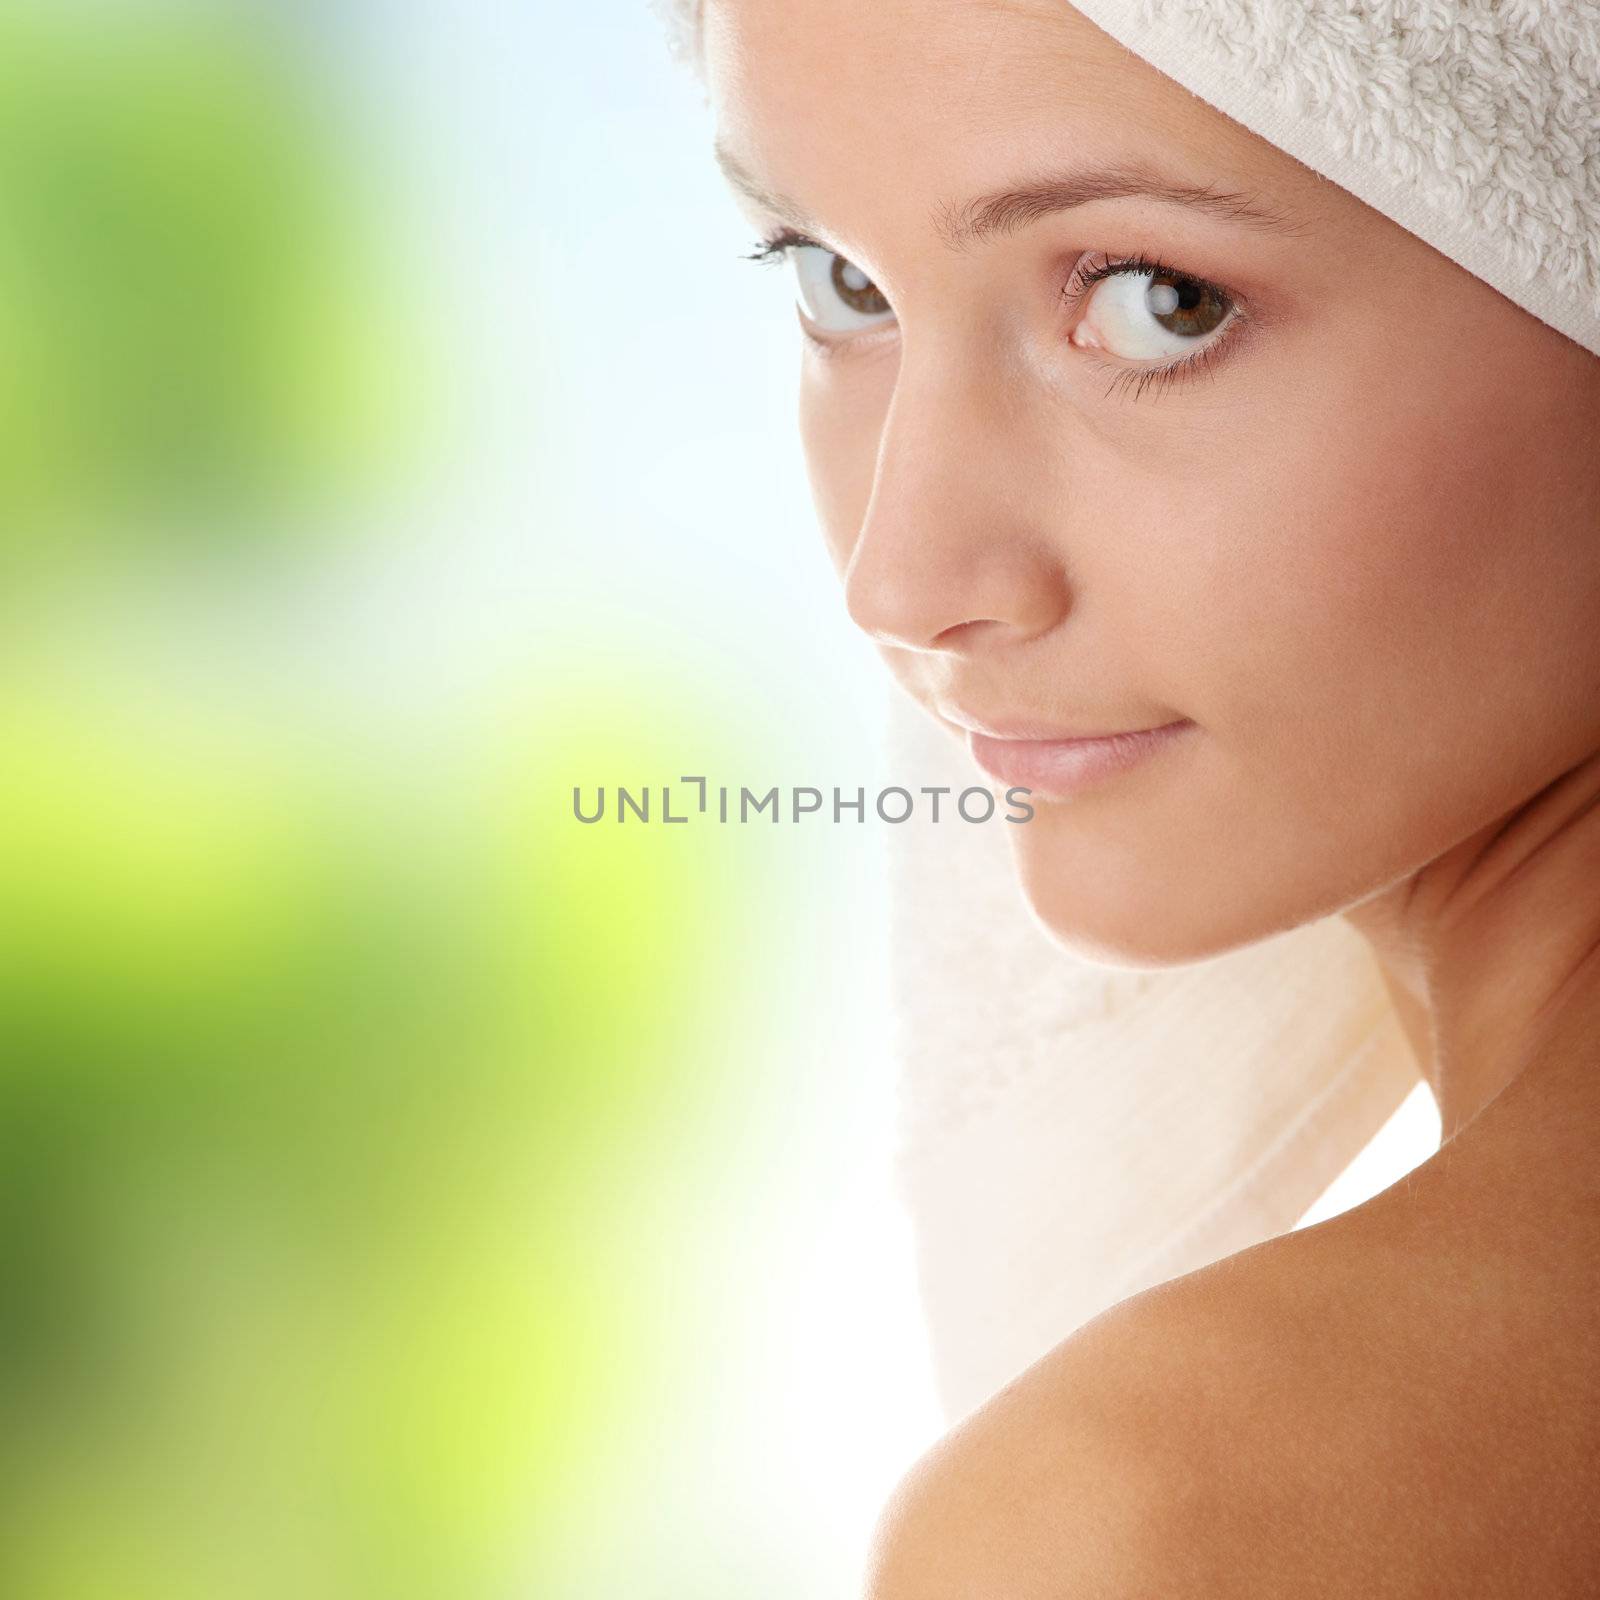 Relax concept: beautiful nude woman with soft skin in bathtube